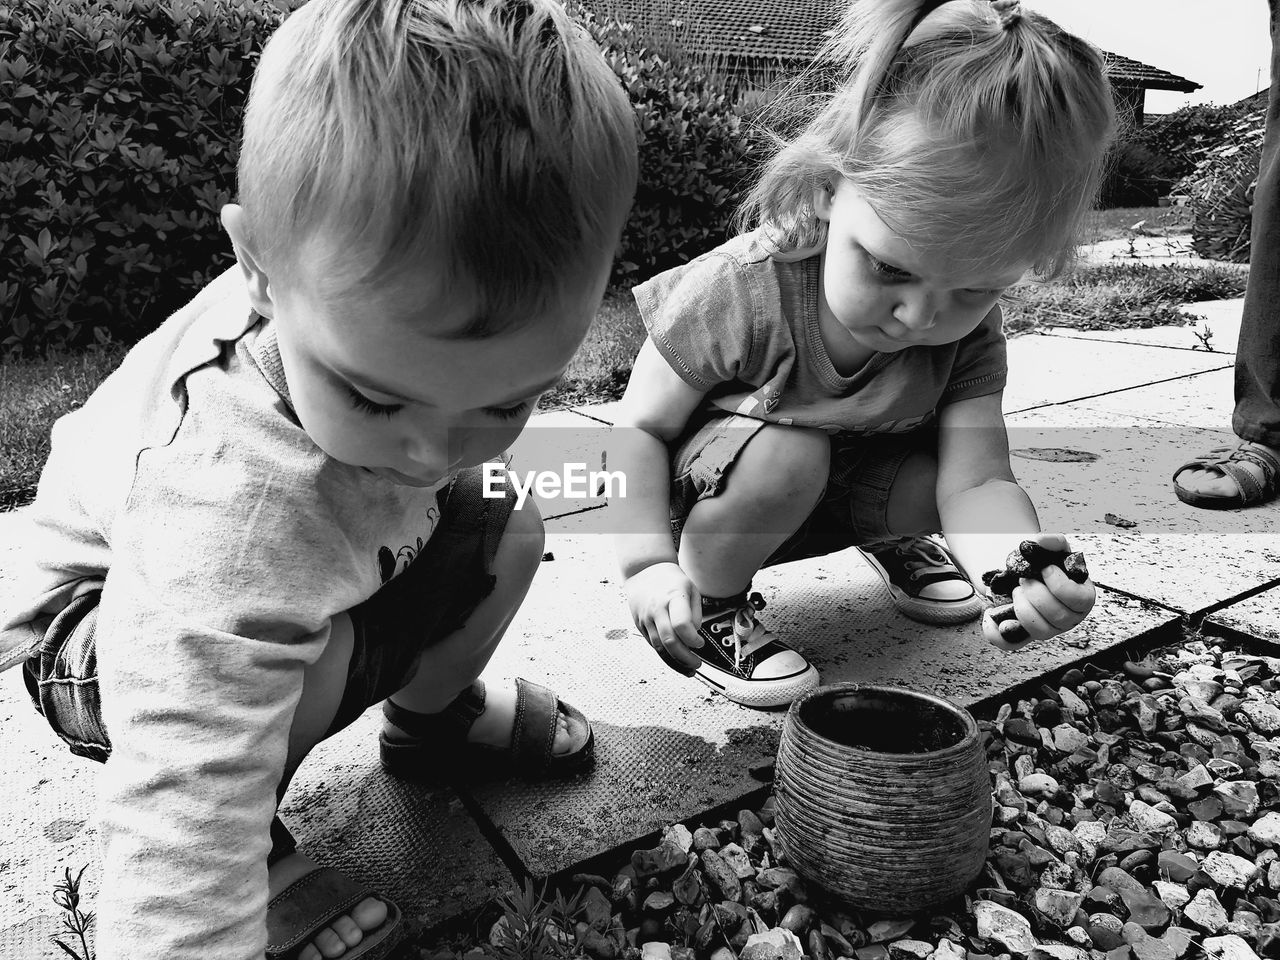 Siblings collecting pebbles while crouching in yard